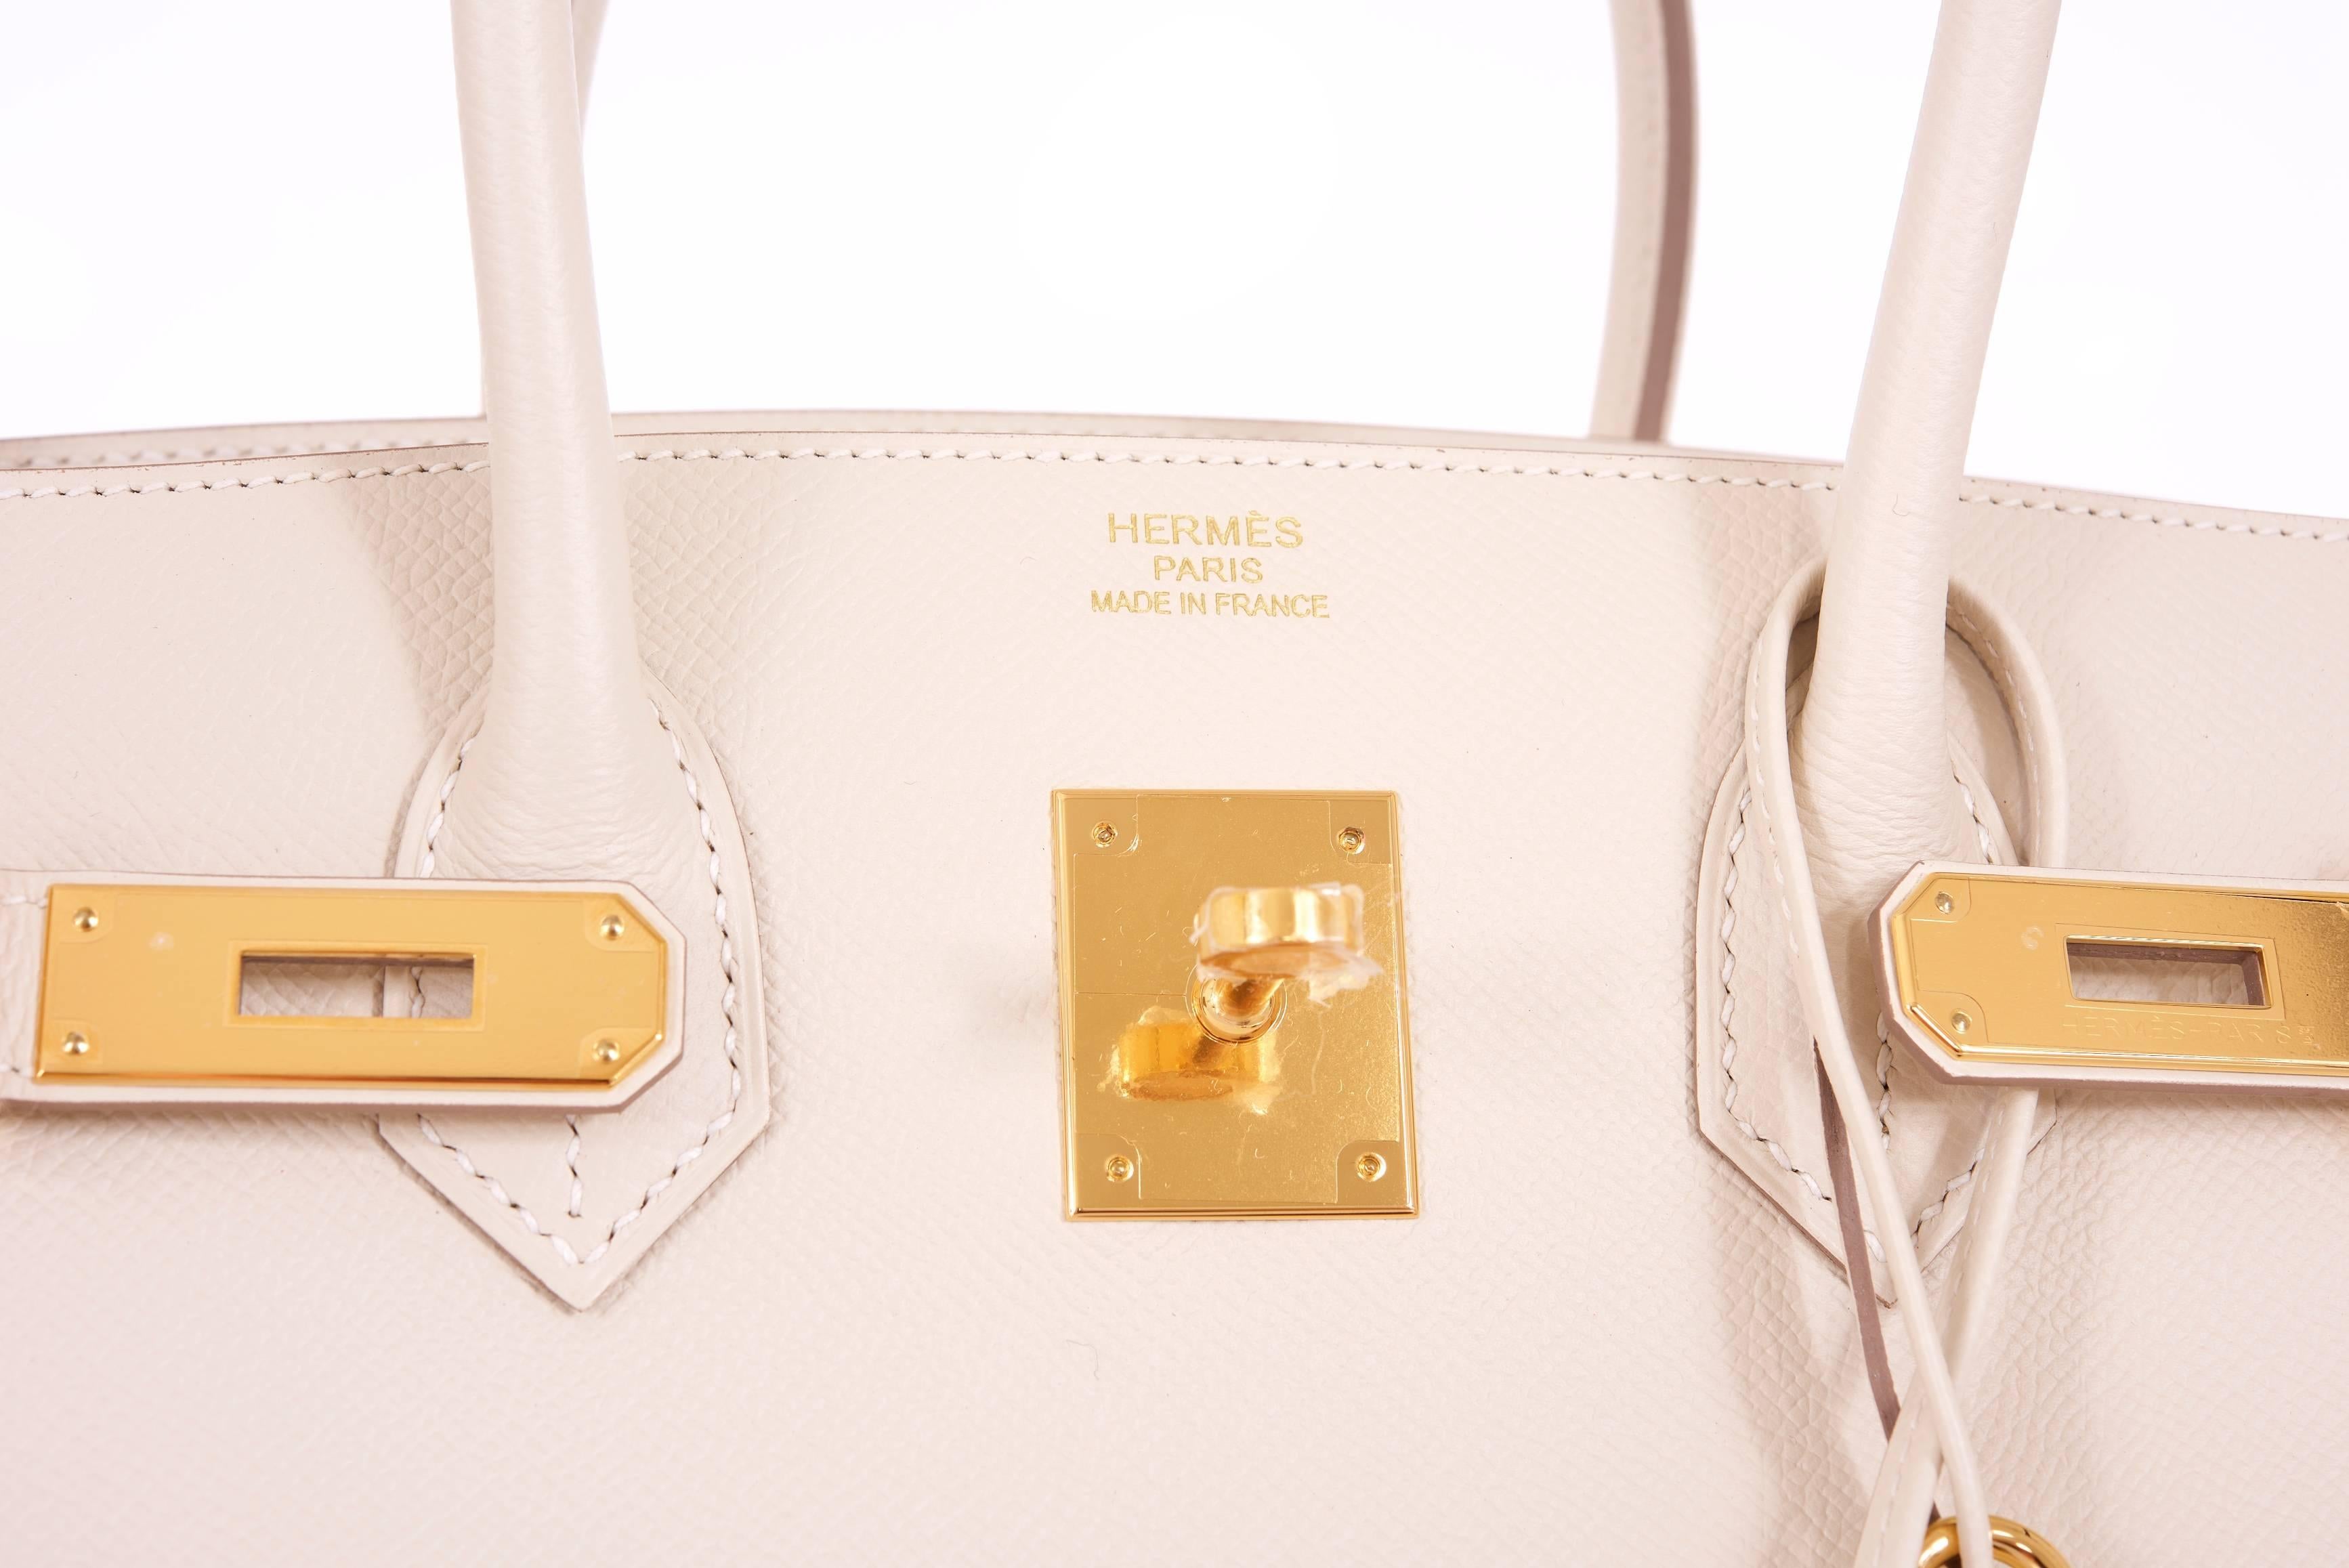 Hermes 35cm Birkin Bag Super Rare Craie Epsom leather Gold hardware stunning color super rare hardware!
Hardware: gold
Country of Origin: France
Color: craie
Accompanied by: Care Booklet; Dust Bag Plastic Raincoat box
Closure: Clasp
Height (in